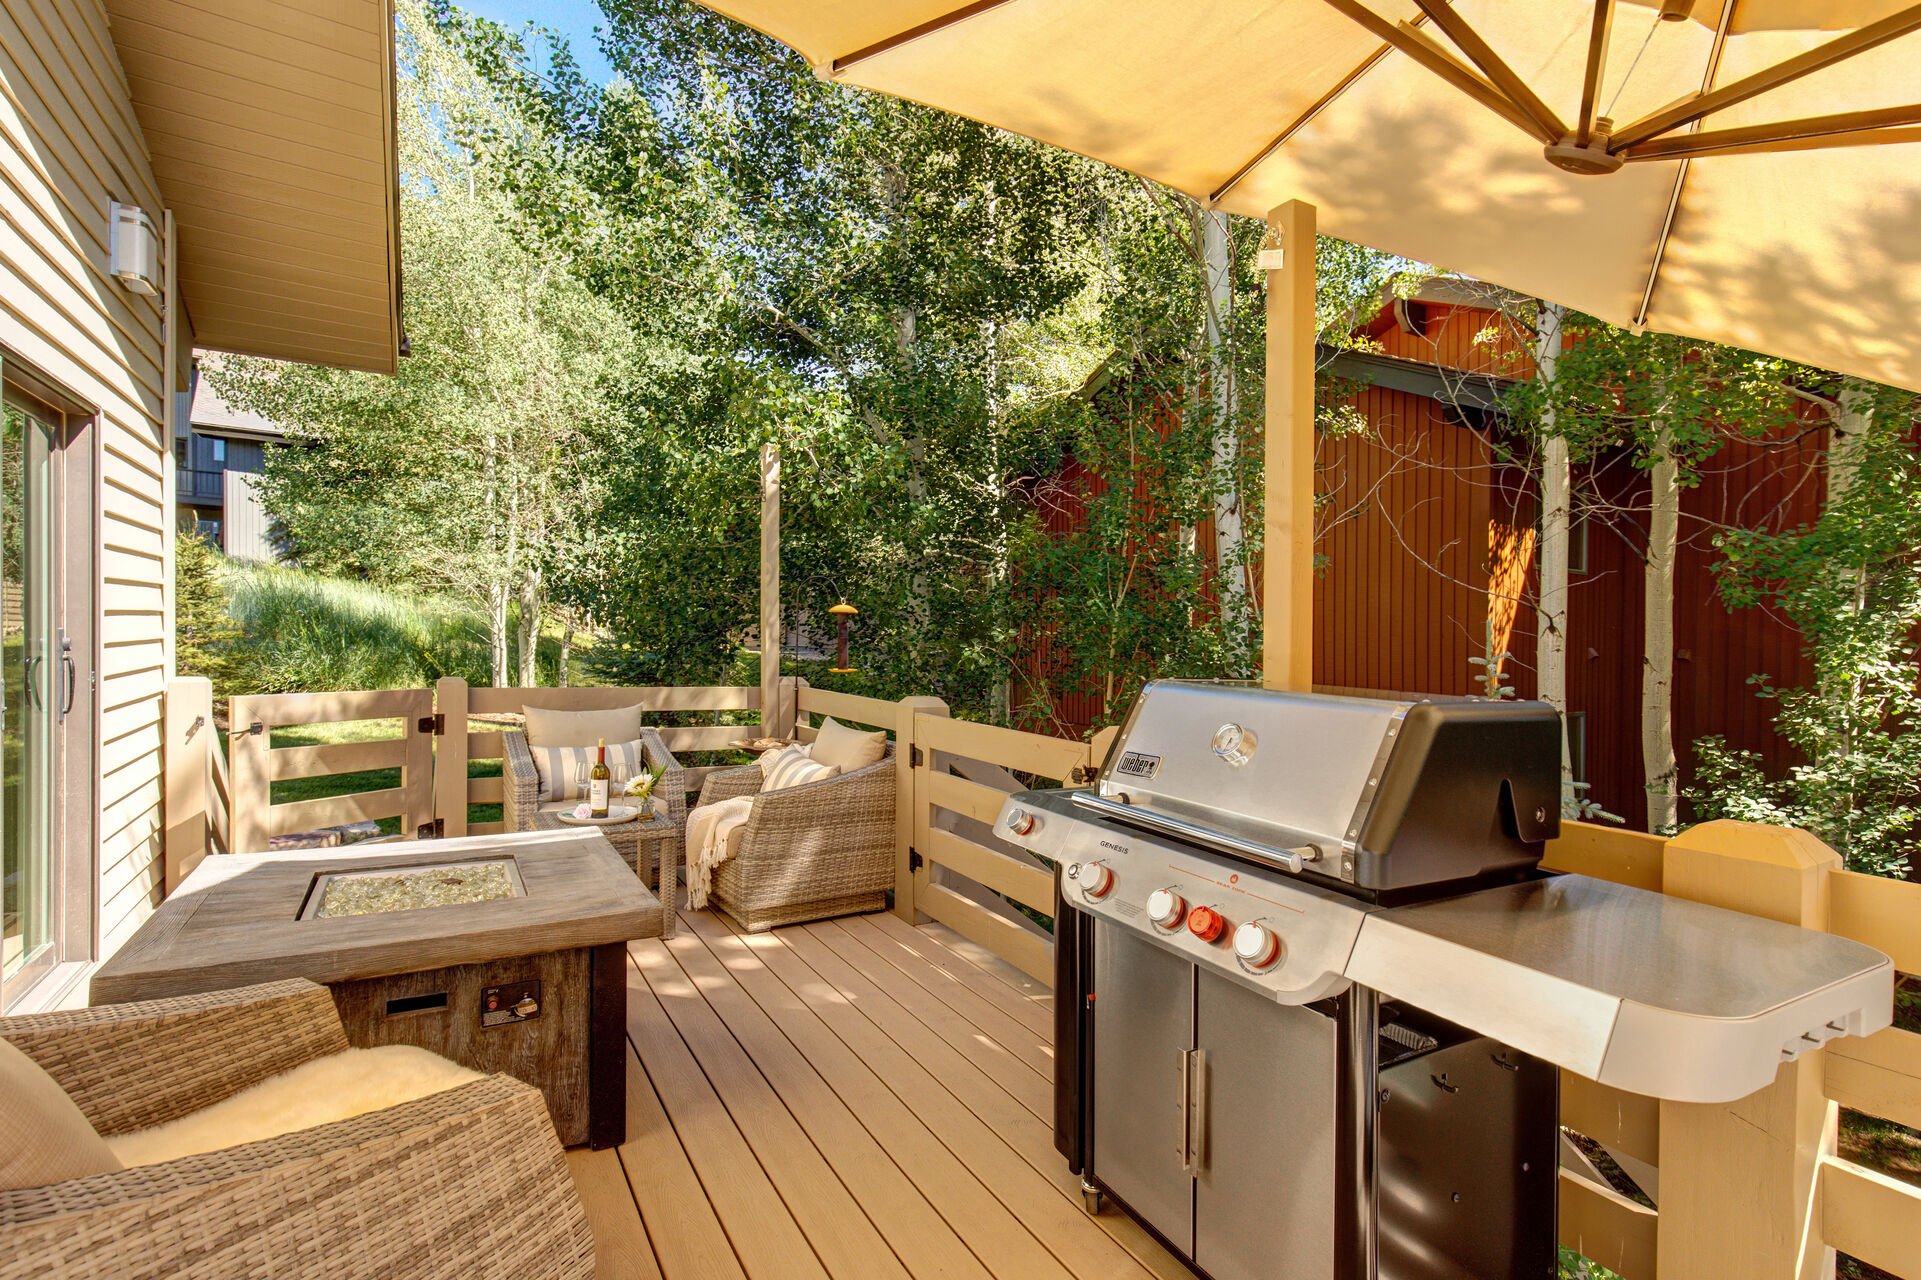 Main Level Deck with a Fire Table and BBQ